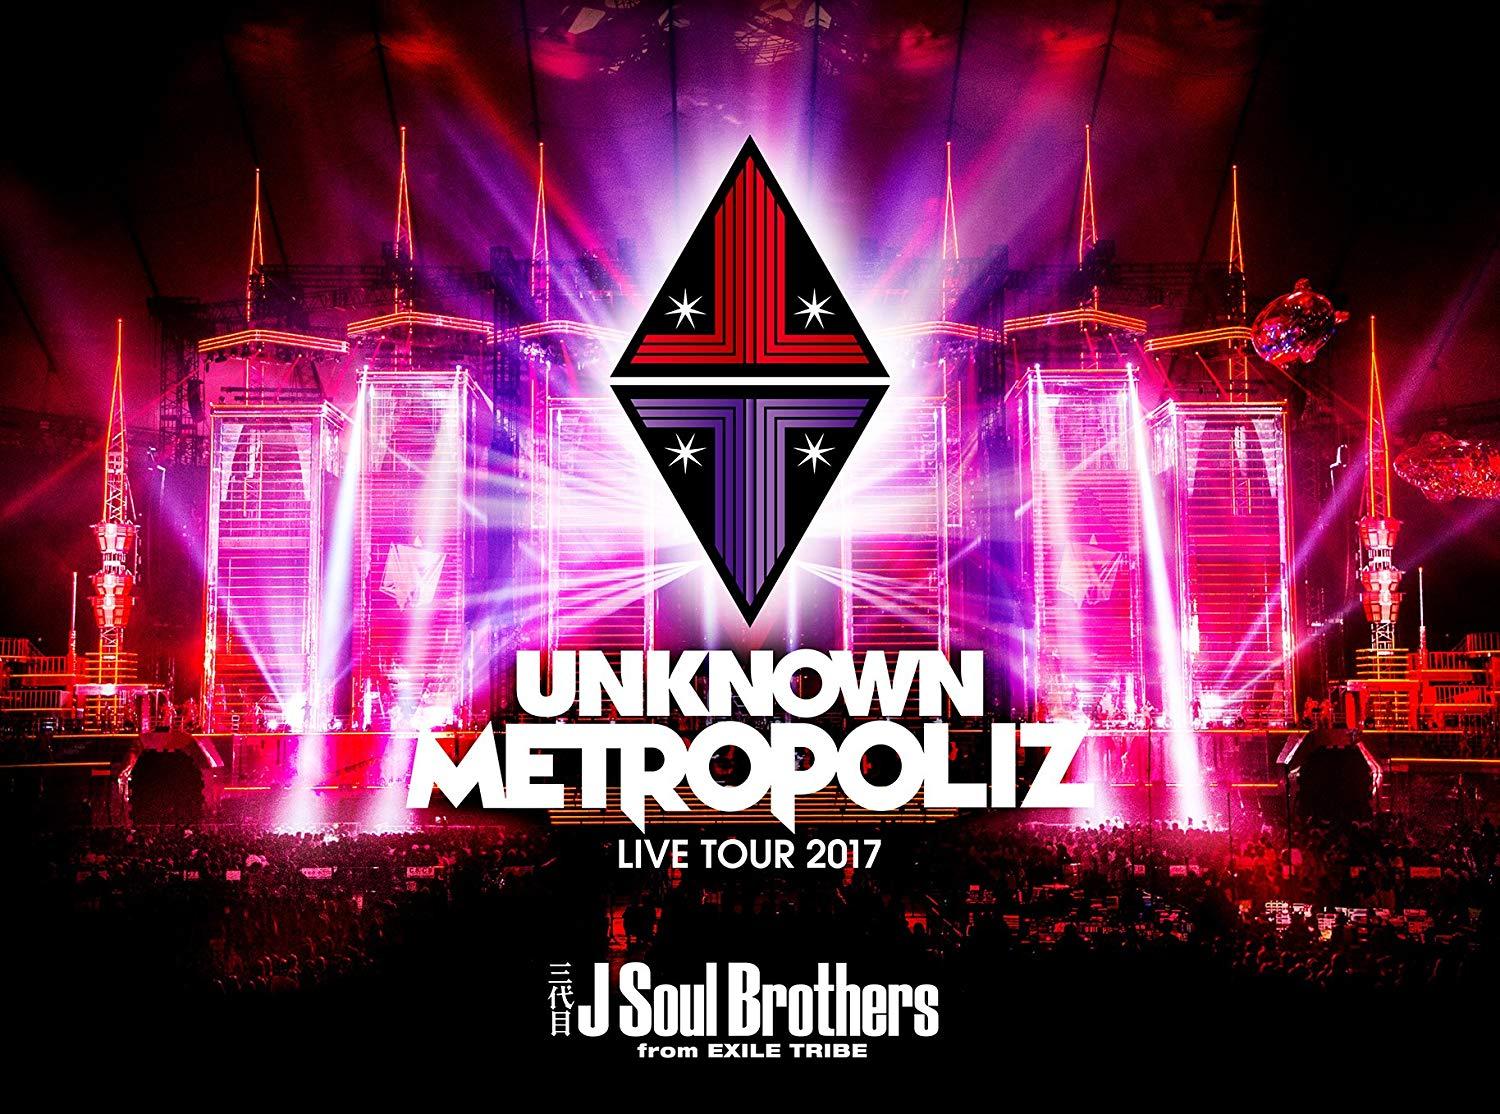 O J Soul Brothers LIVE TOUR 2017gUNKNOWN METROPOLIZ (񐶎Y) O J Soul Brothers from EXILE TRIBE